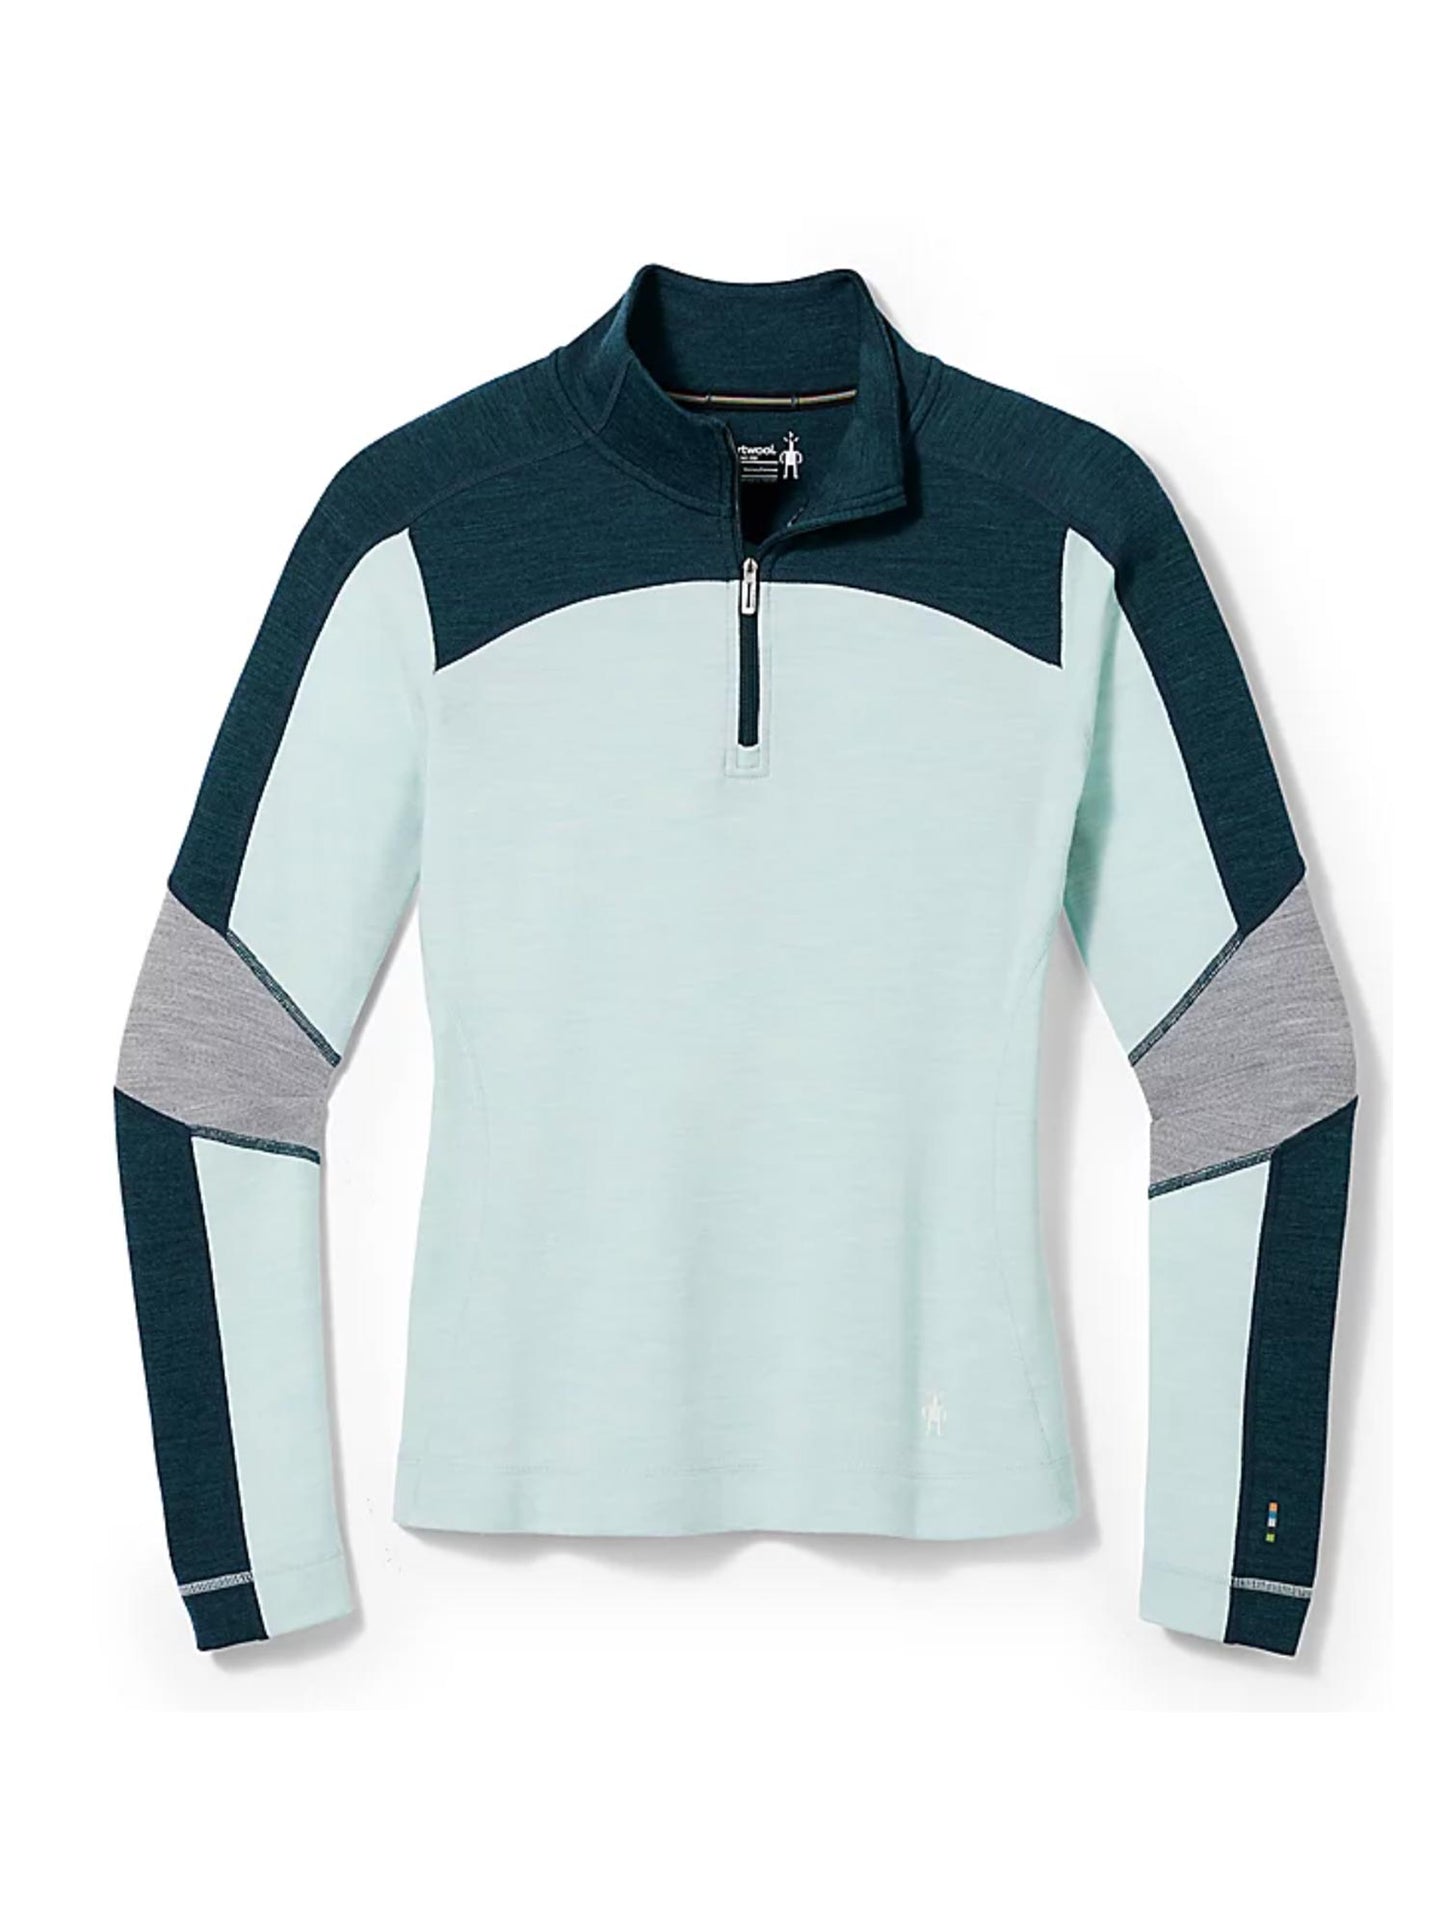 women's base layer 1/4 zip top -  blue, light blue and grey colorblock